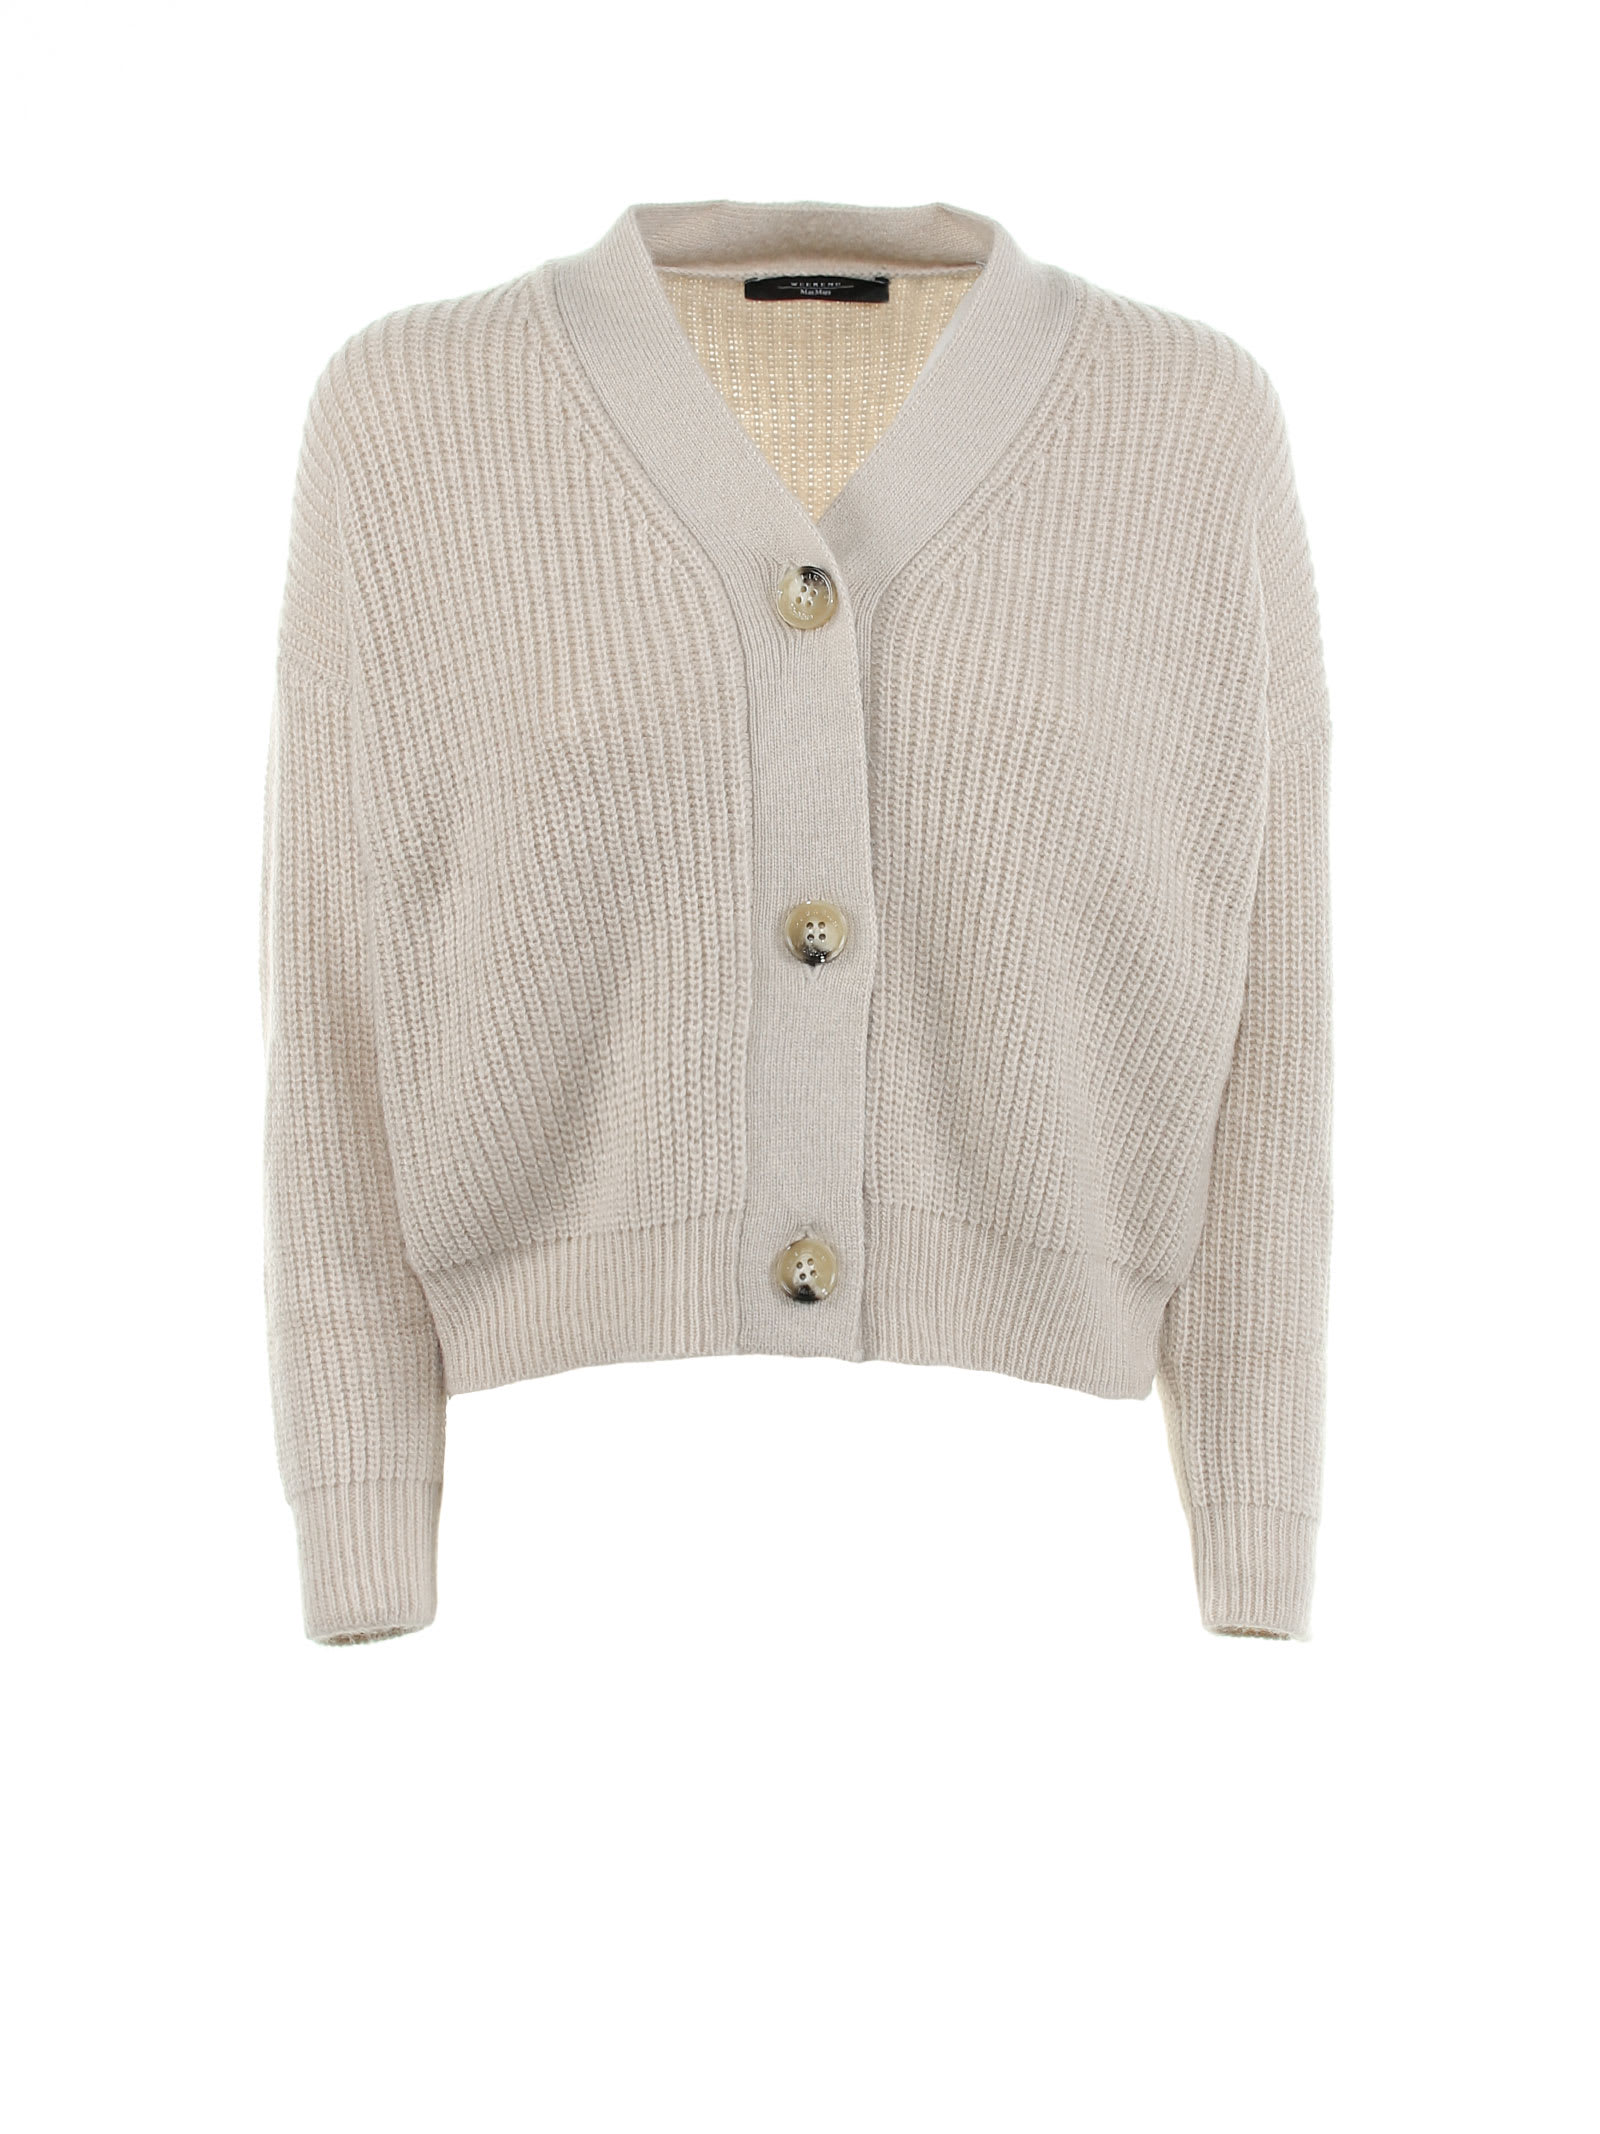 Weekend Max Mara Falla Sweater With Three Buttons In Beige